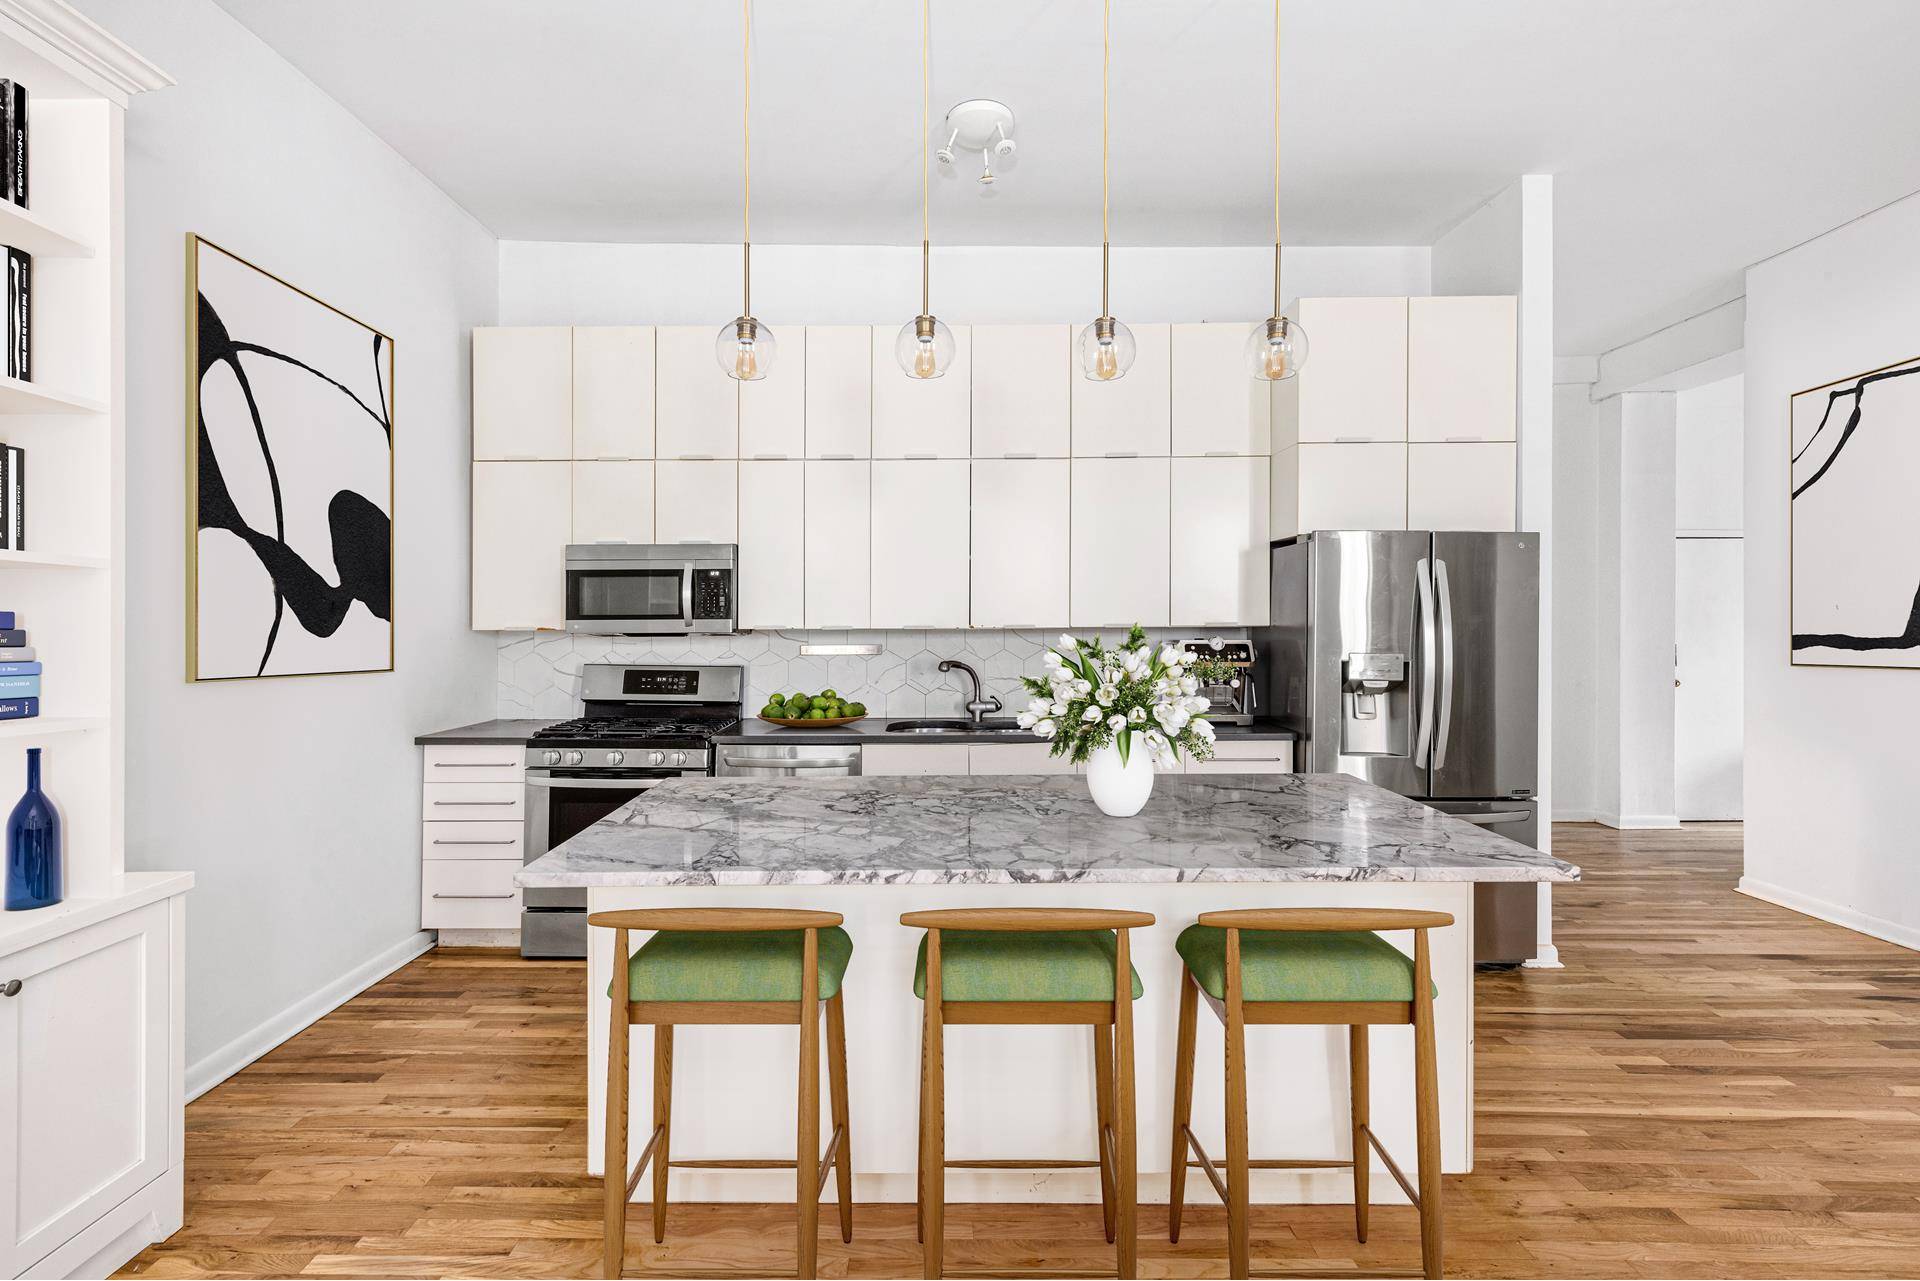 Stepping into the 1, 535 square foot home, this three bed two bath charming loft greets you with soaring 12' ceilings and a layout perfect for entertaining.